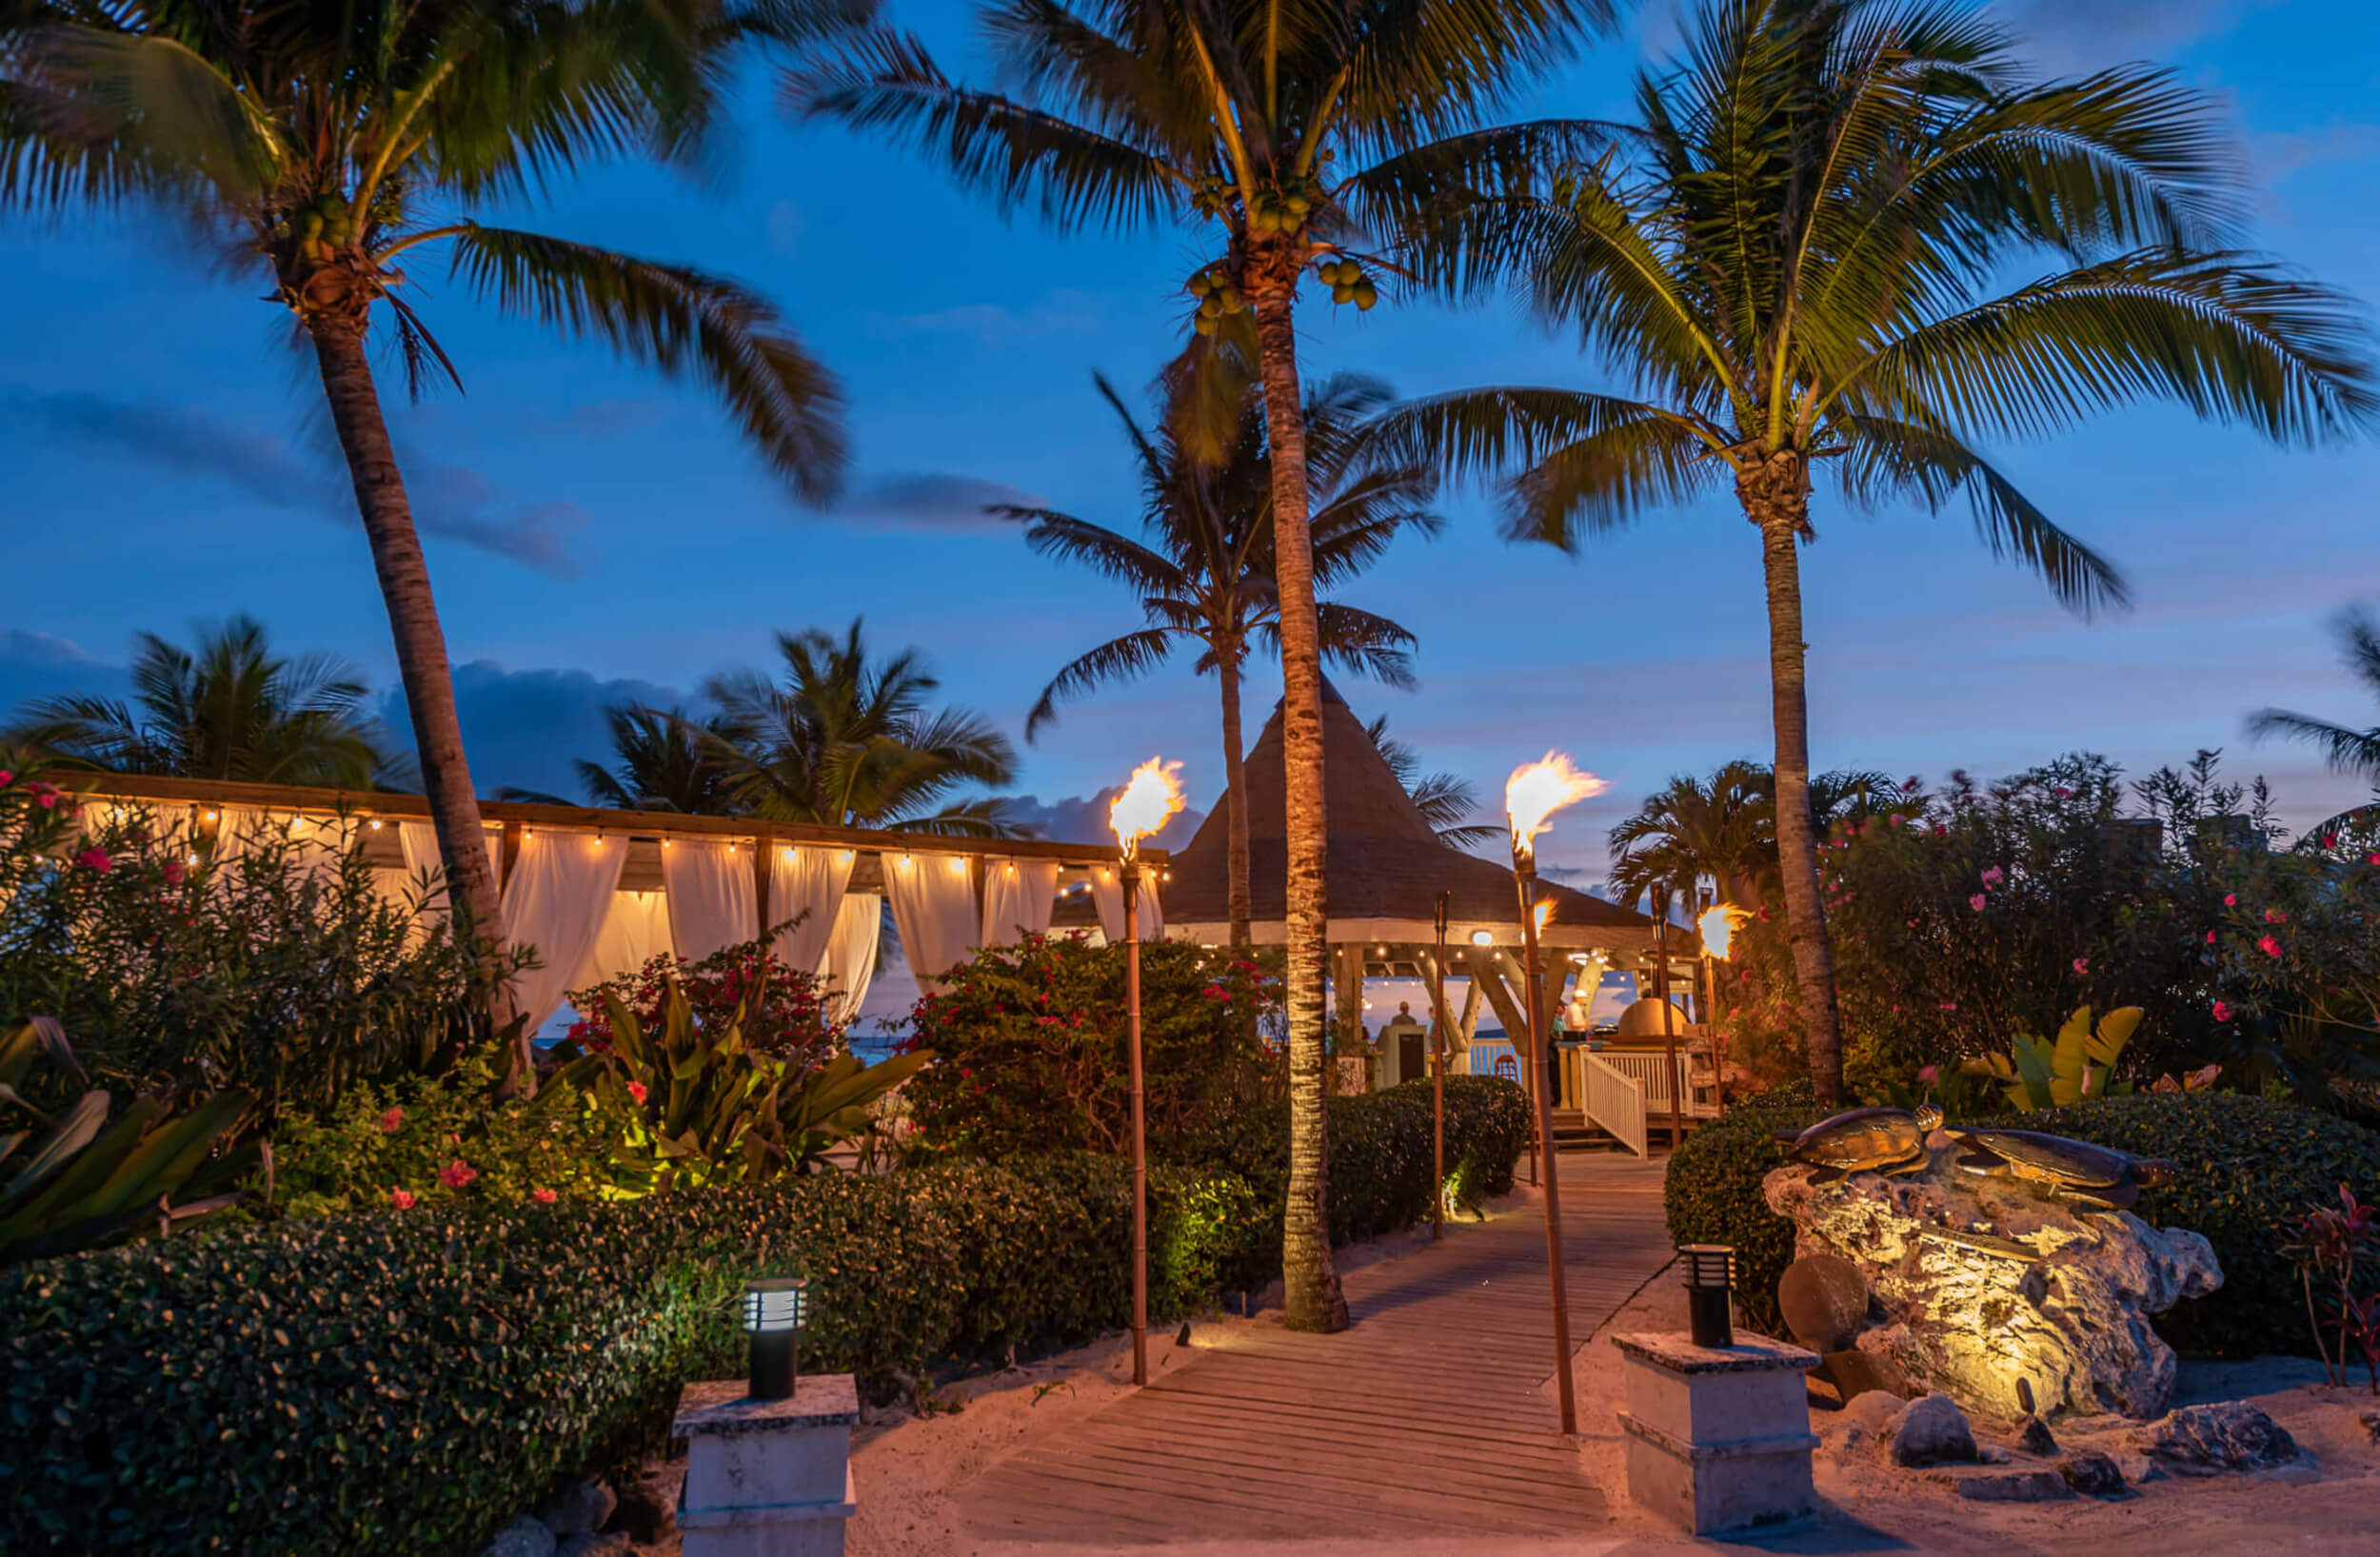 Enchanting evening ambiance at The Abaco Club with torch-lit paths, highlighting upscale coastal living and club amenities